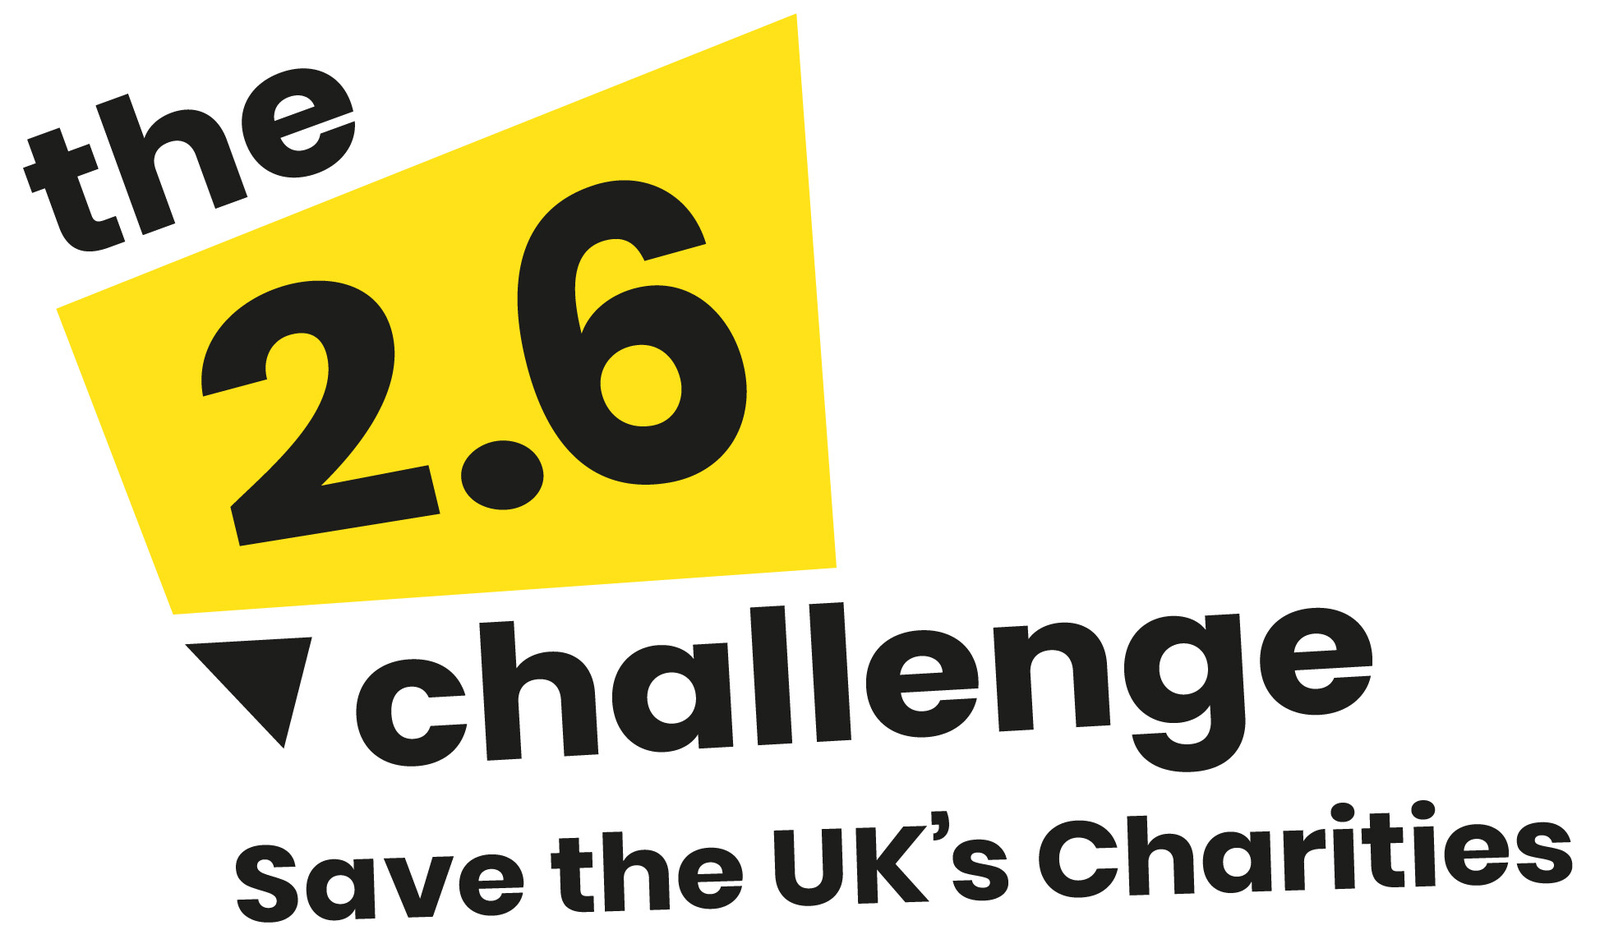 UK’S MASS PARTICIPATION EVENT ORGANISERS UNITE TO LAUNCH THE 2.6 CHALLENGE 